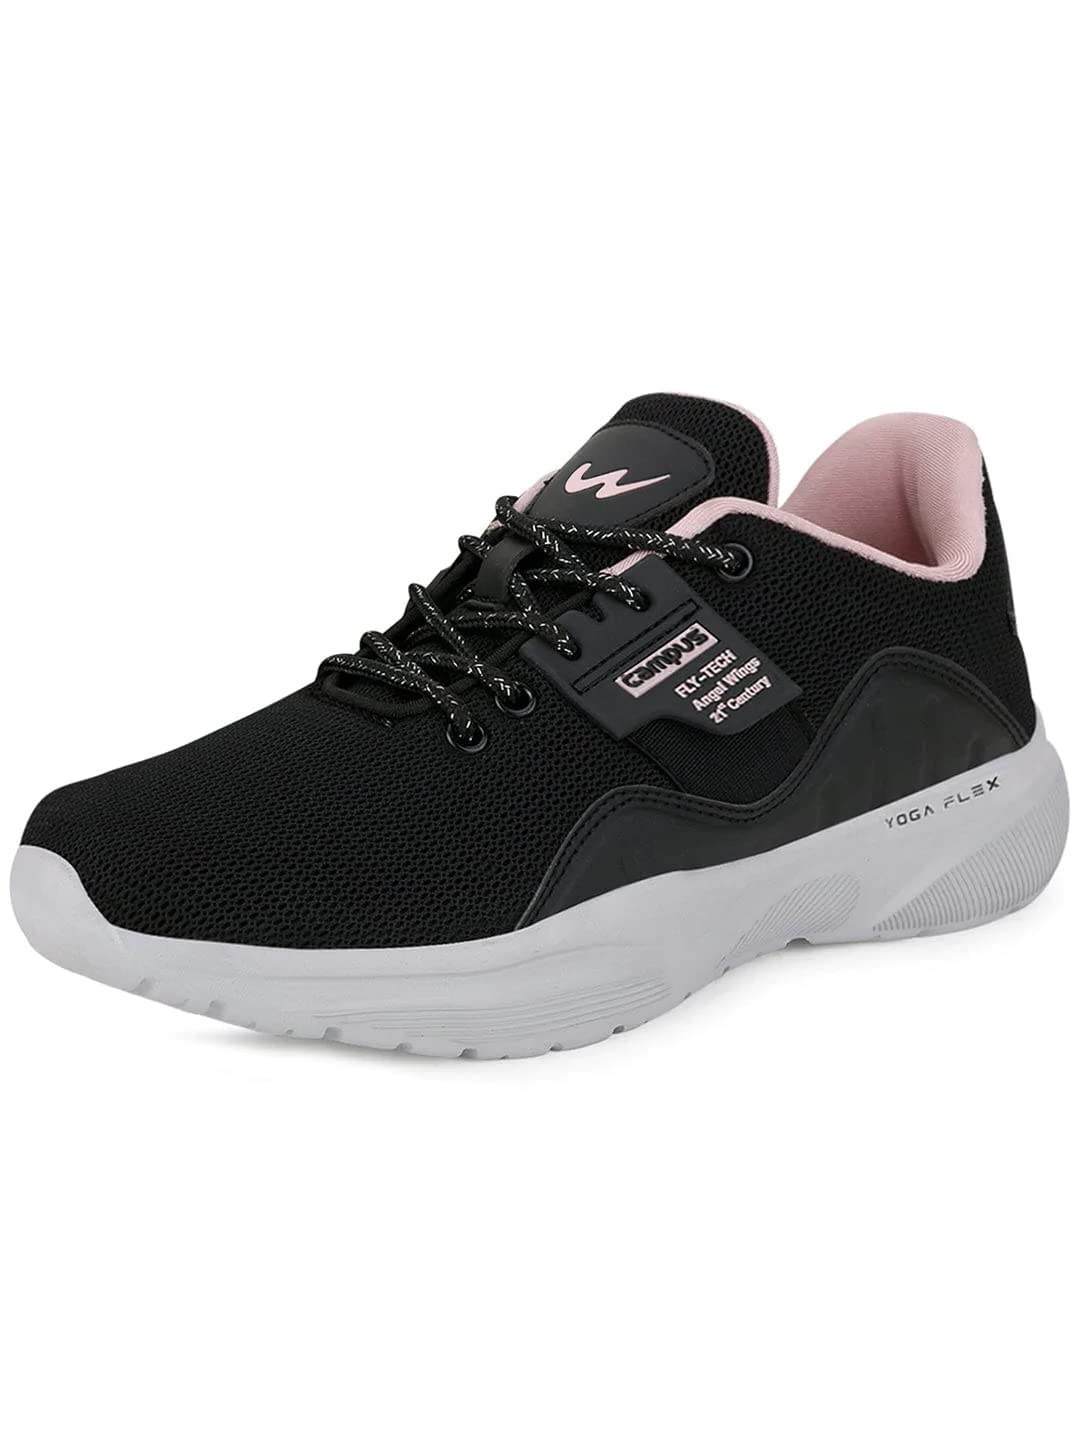 Campus Women's Misty Running Shoes